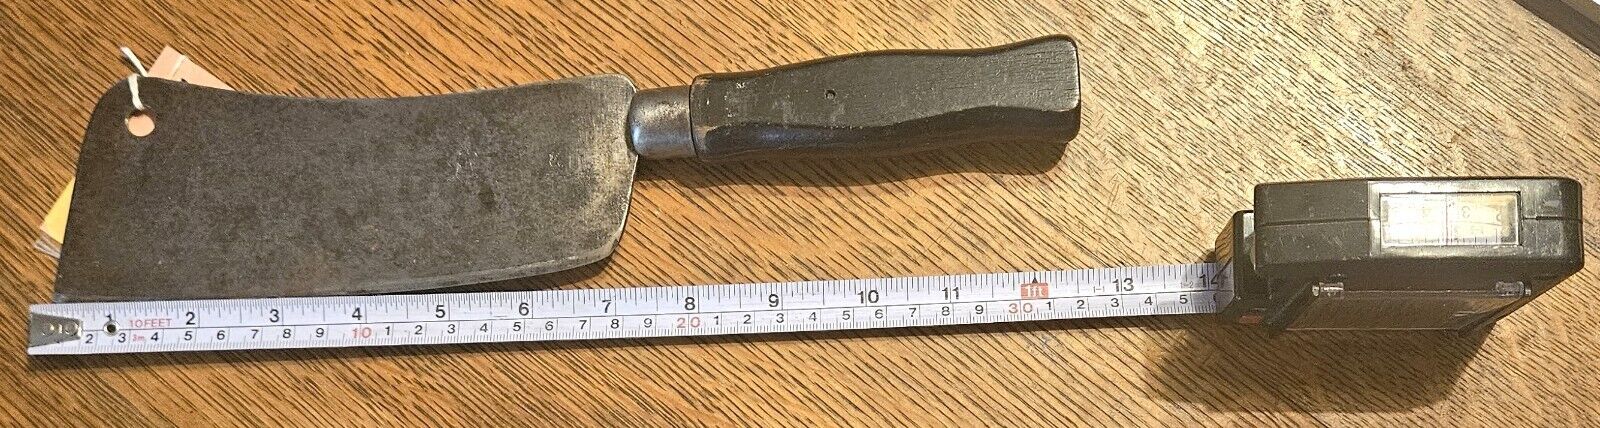 ANTIQUE MEAT CLEAVER 7 INCH